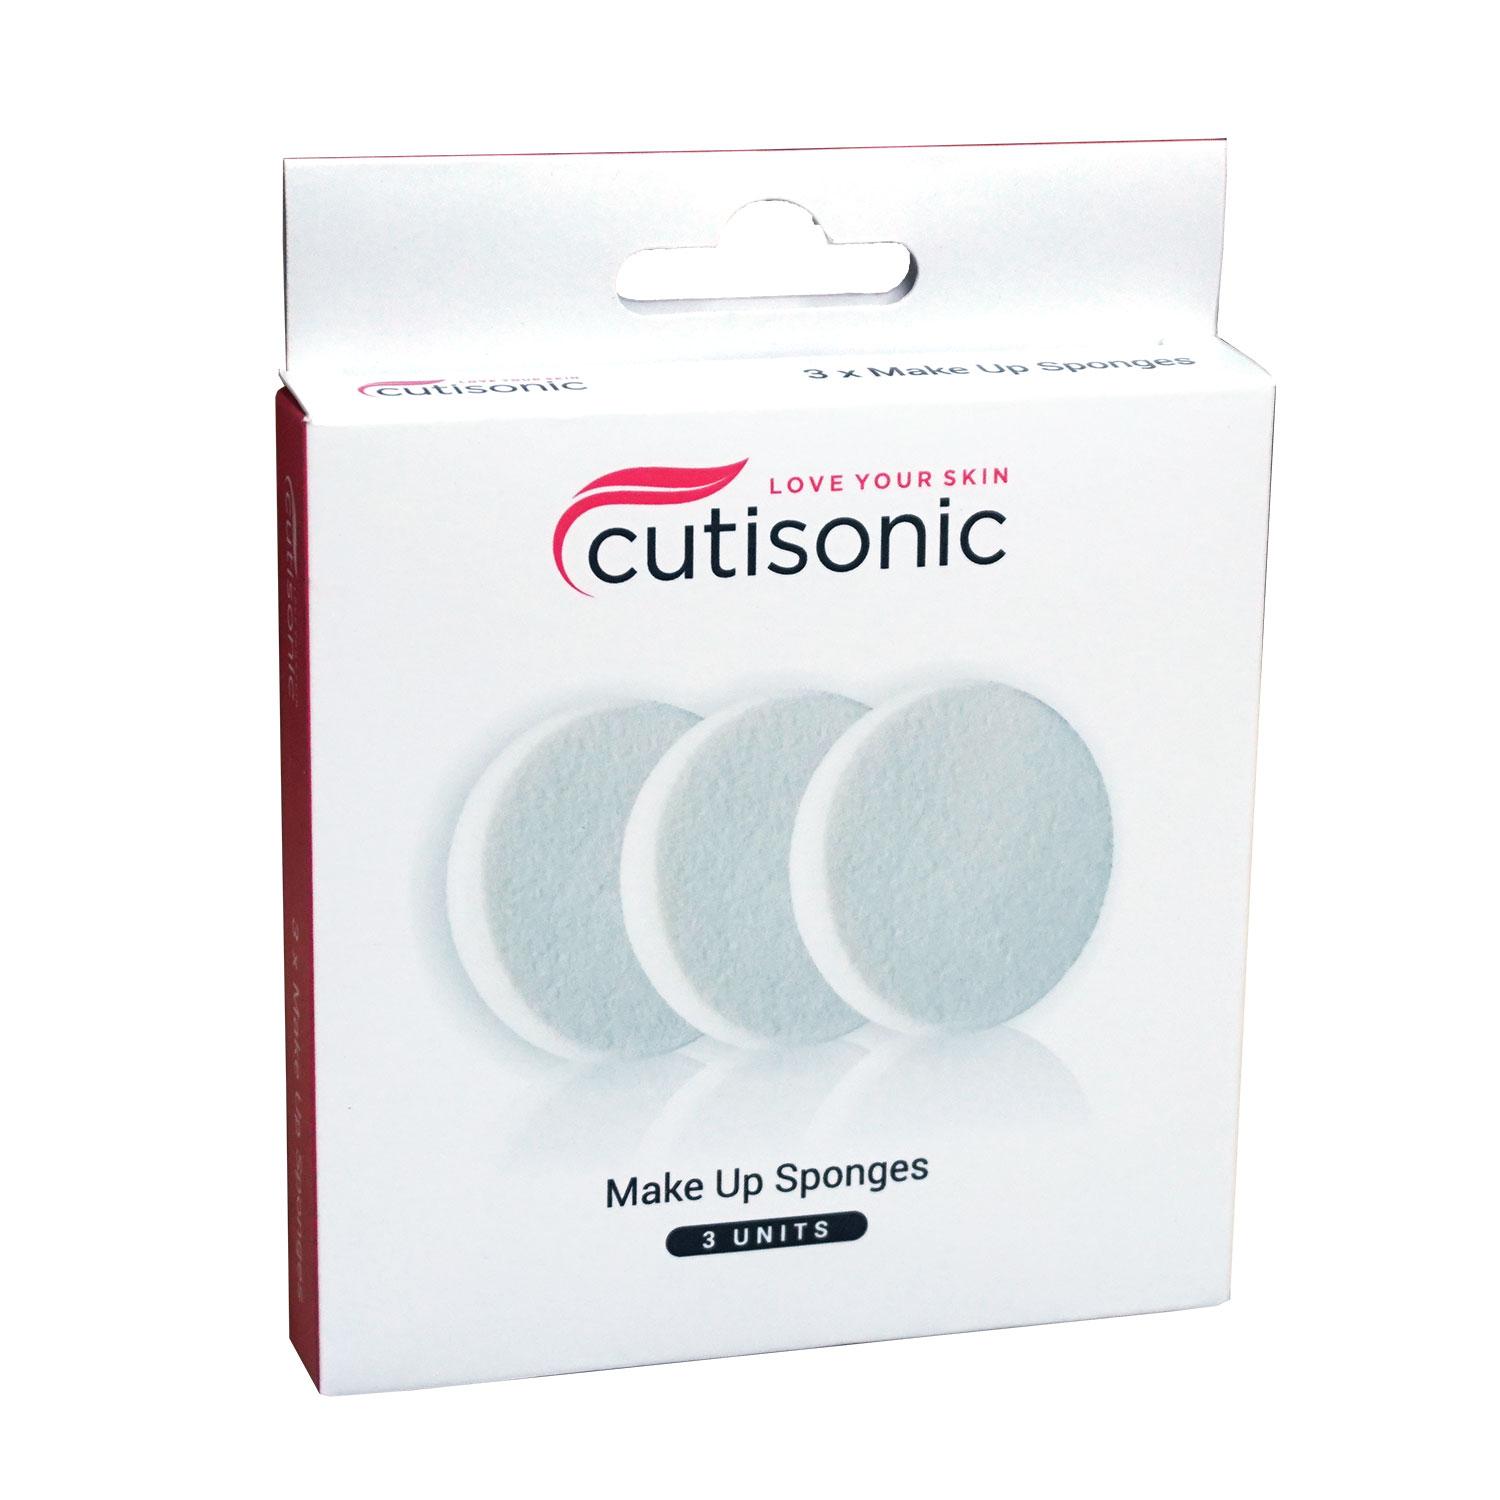 Cutisonic - Replacement Make Up Sponges